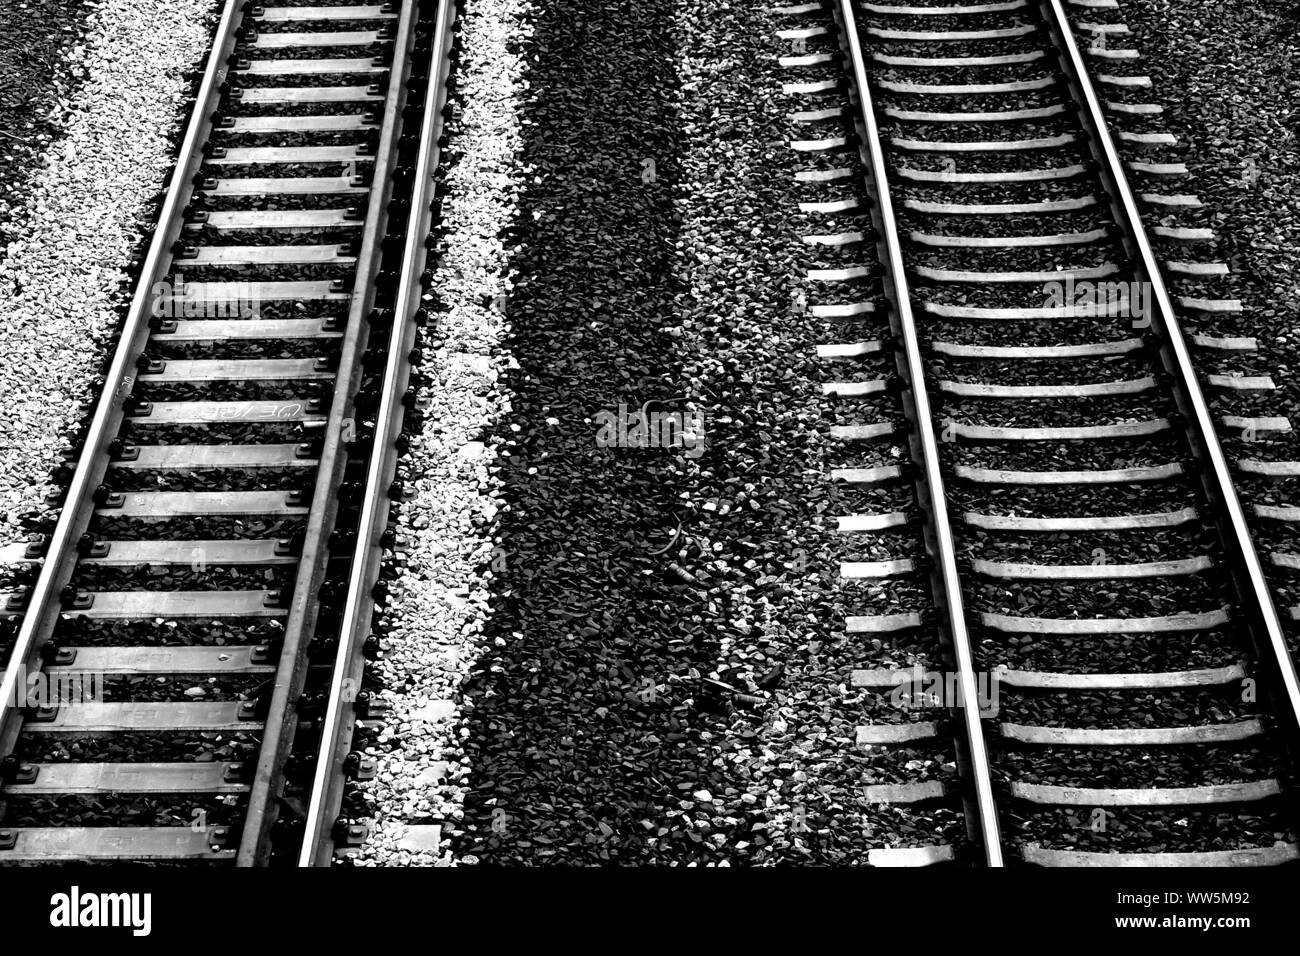 Top view on a roadbed of the German railway system in monochrome, Stock Photo